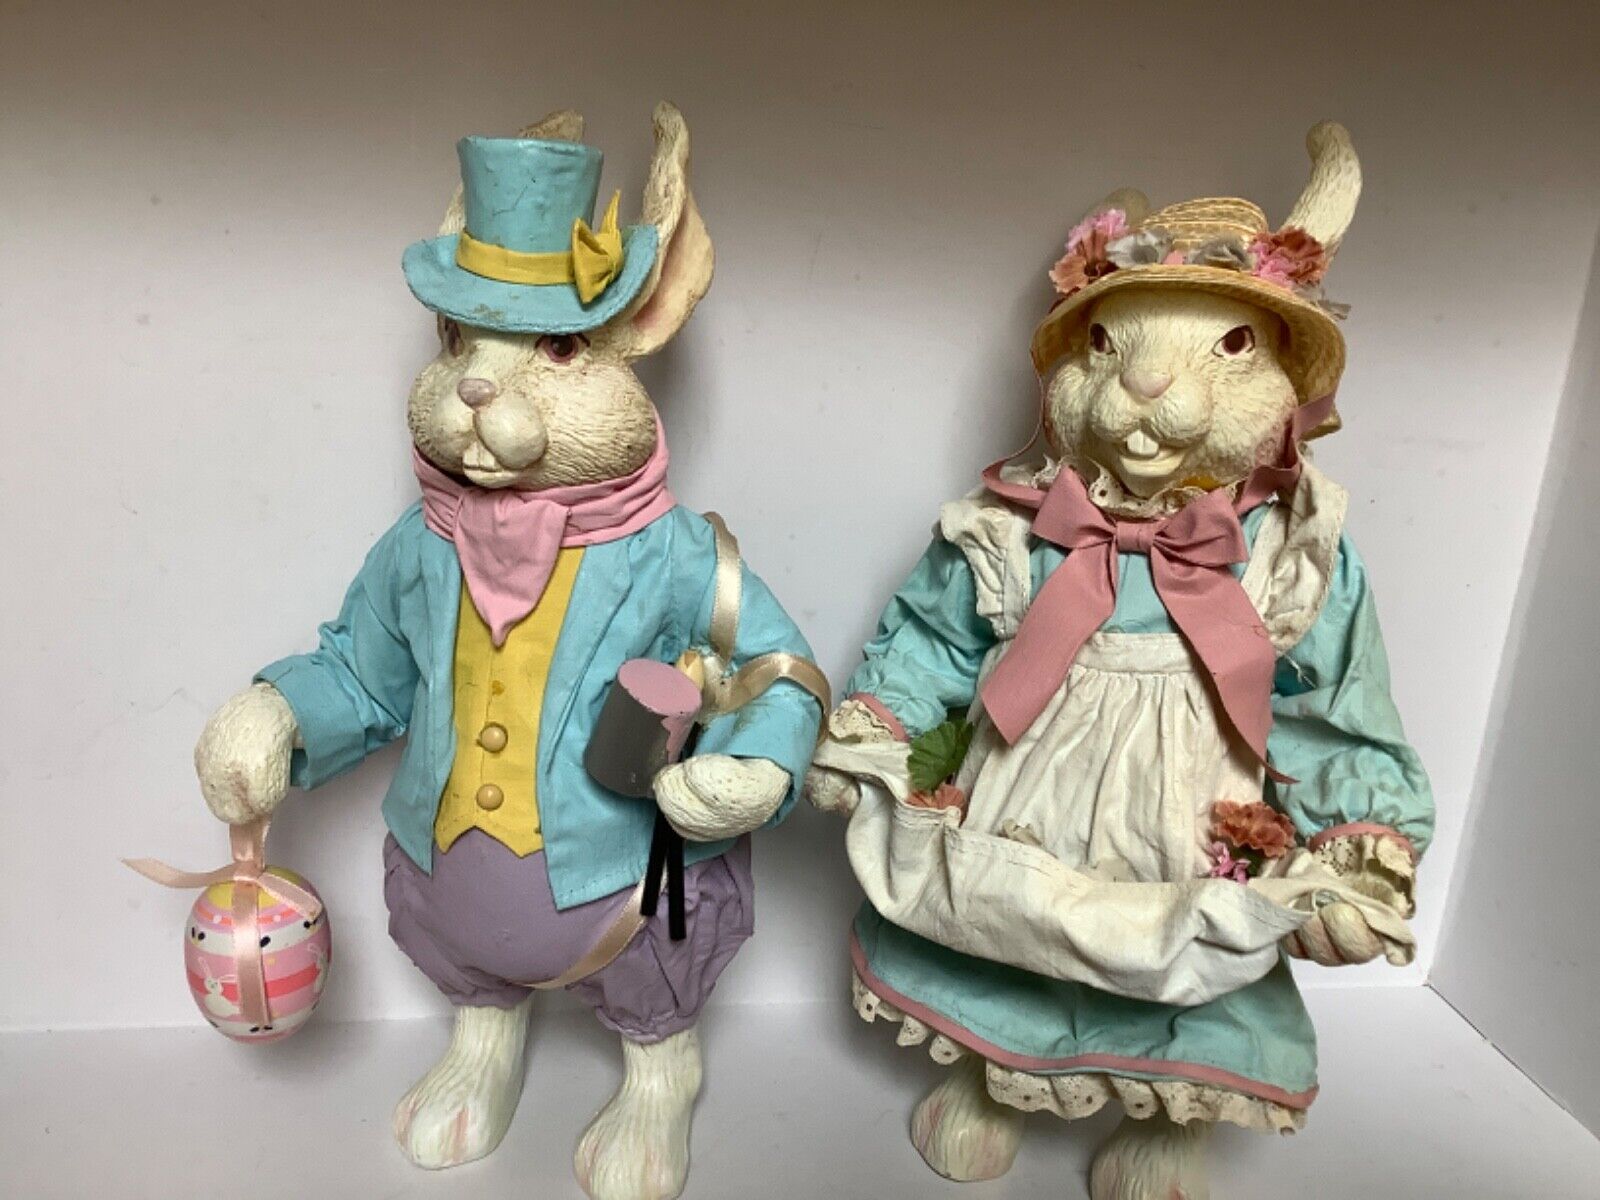 Vintage Clothique Mr and Mrs Bunny Rabbits Midwest of Cannon Falls Figurine